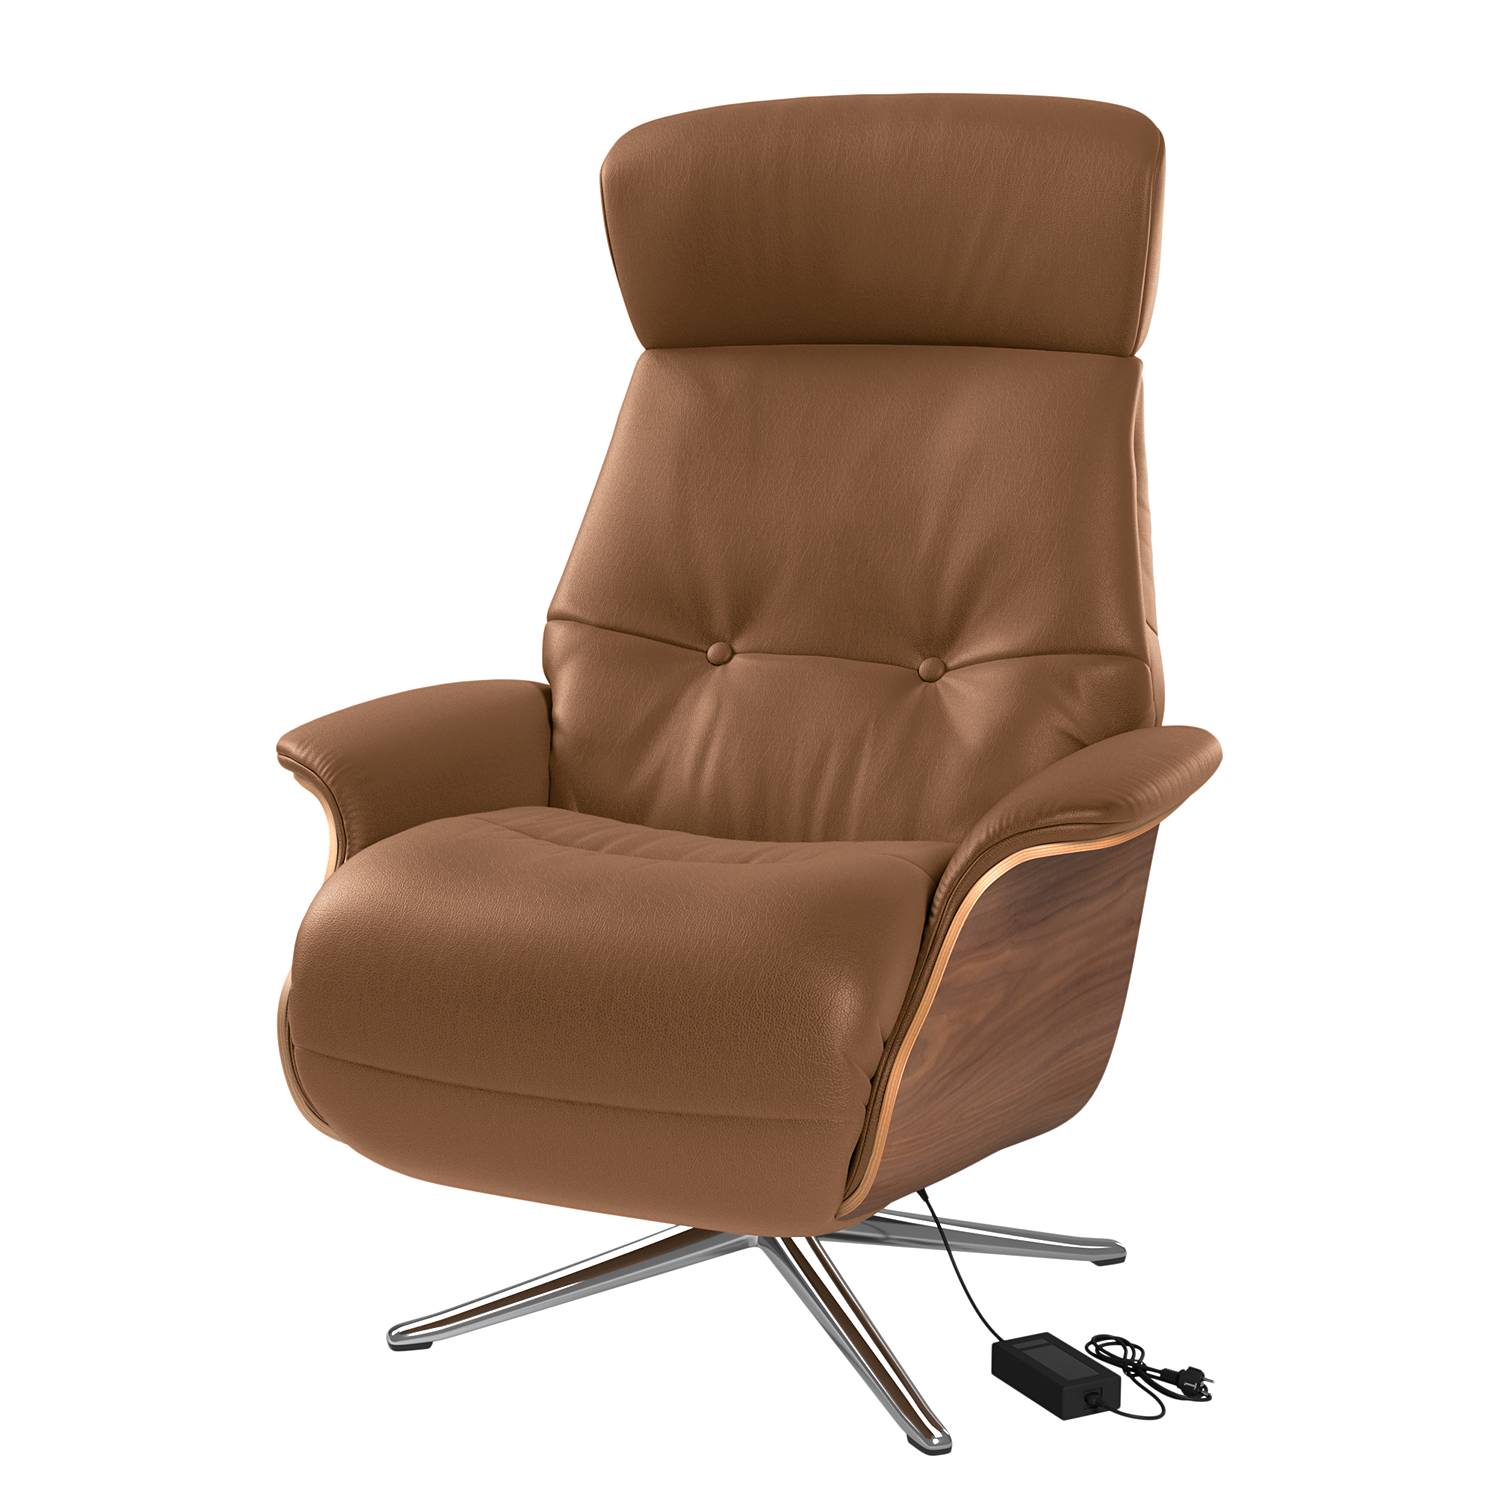 Image of Fauteuil relax Anderson VI 000000001000131418